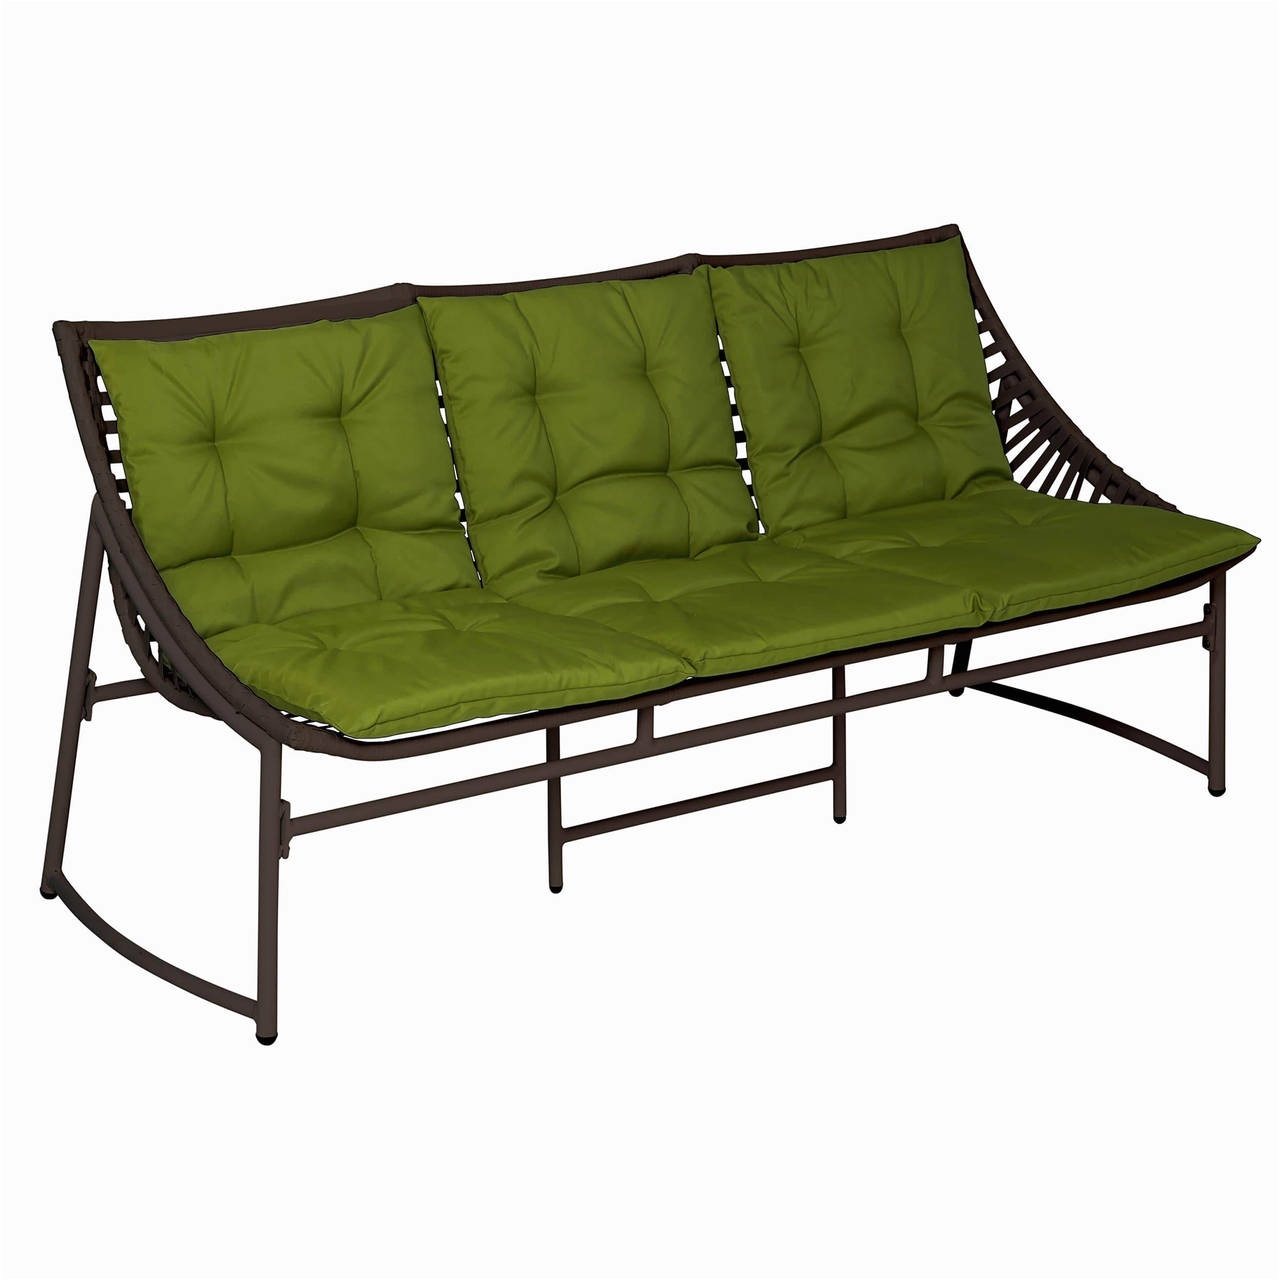 bench building plans inspirational free garden bench plans new wicker outdoor sofa 0d patio chairs sale